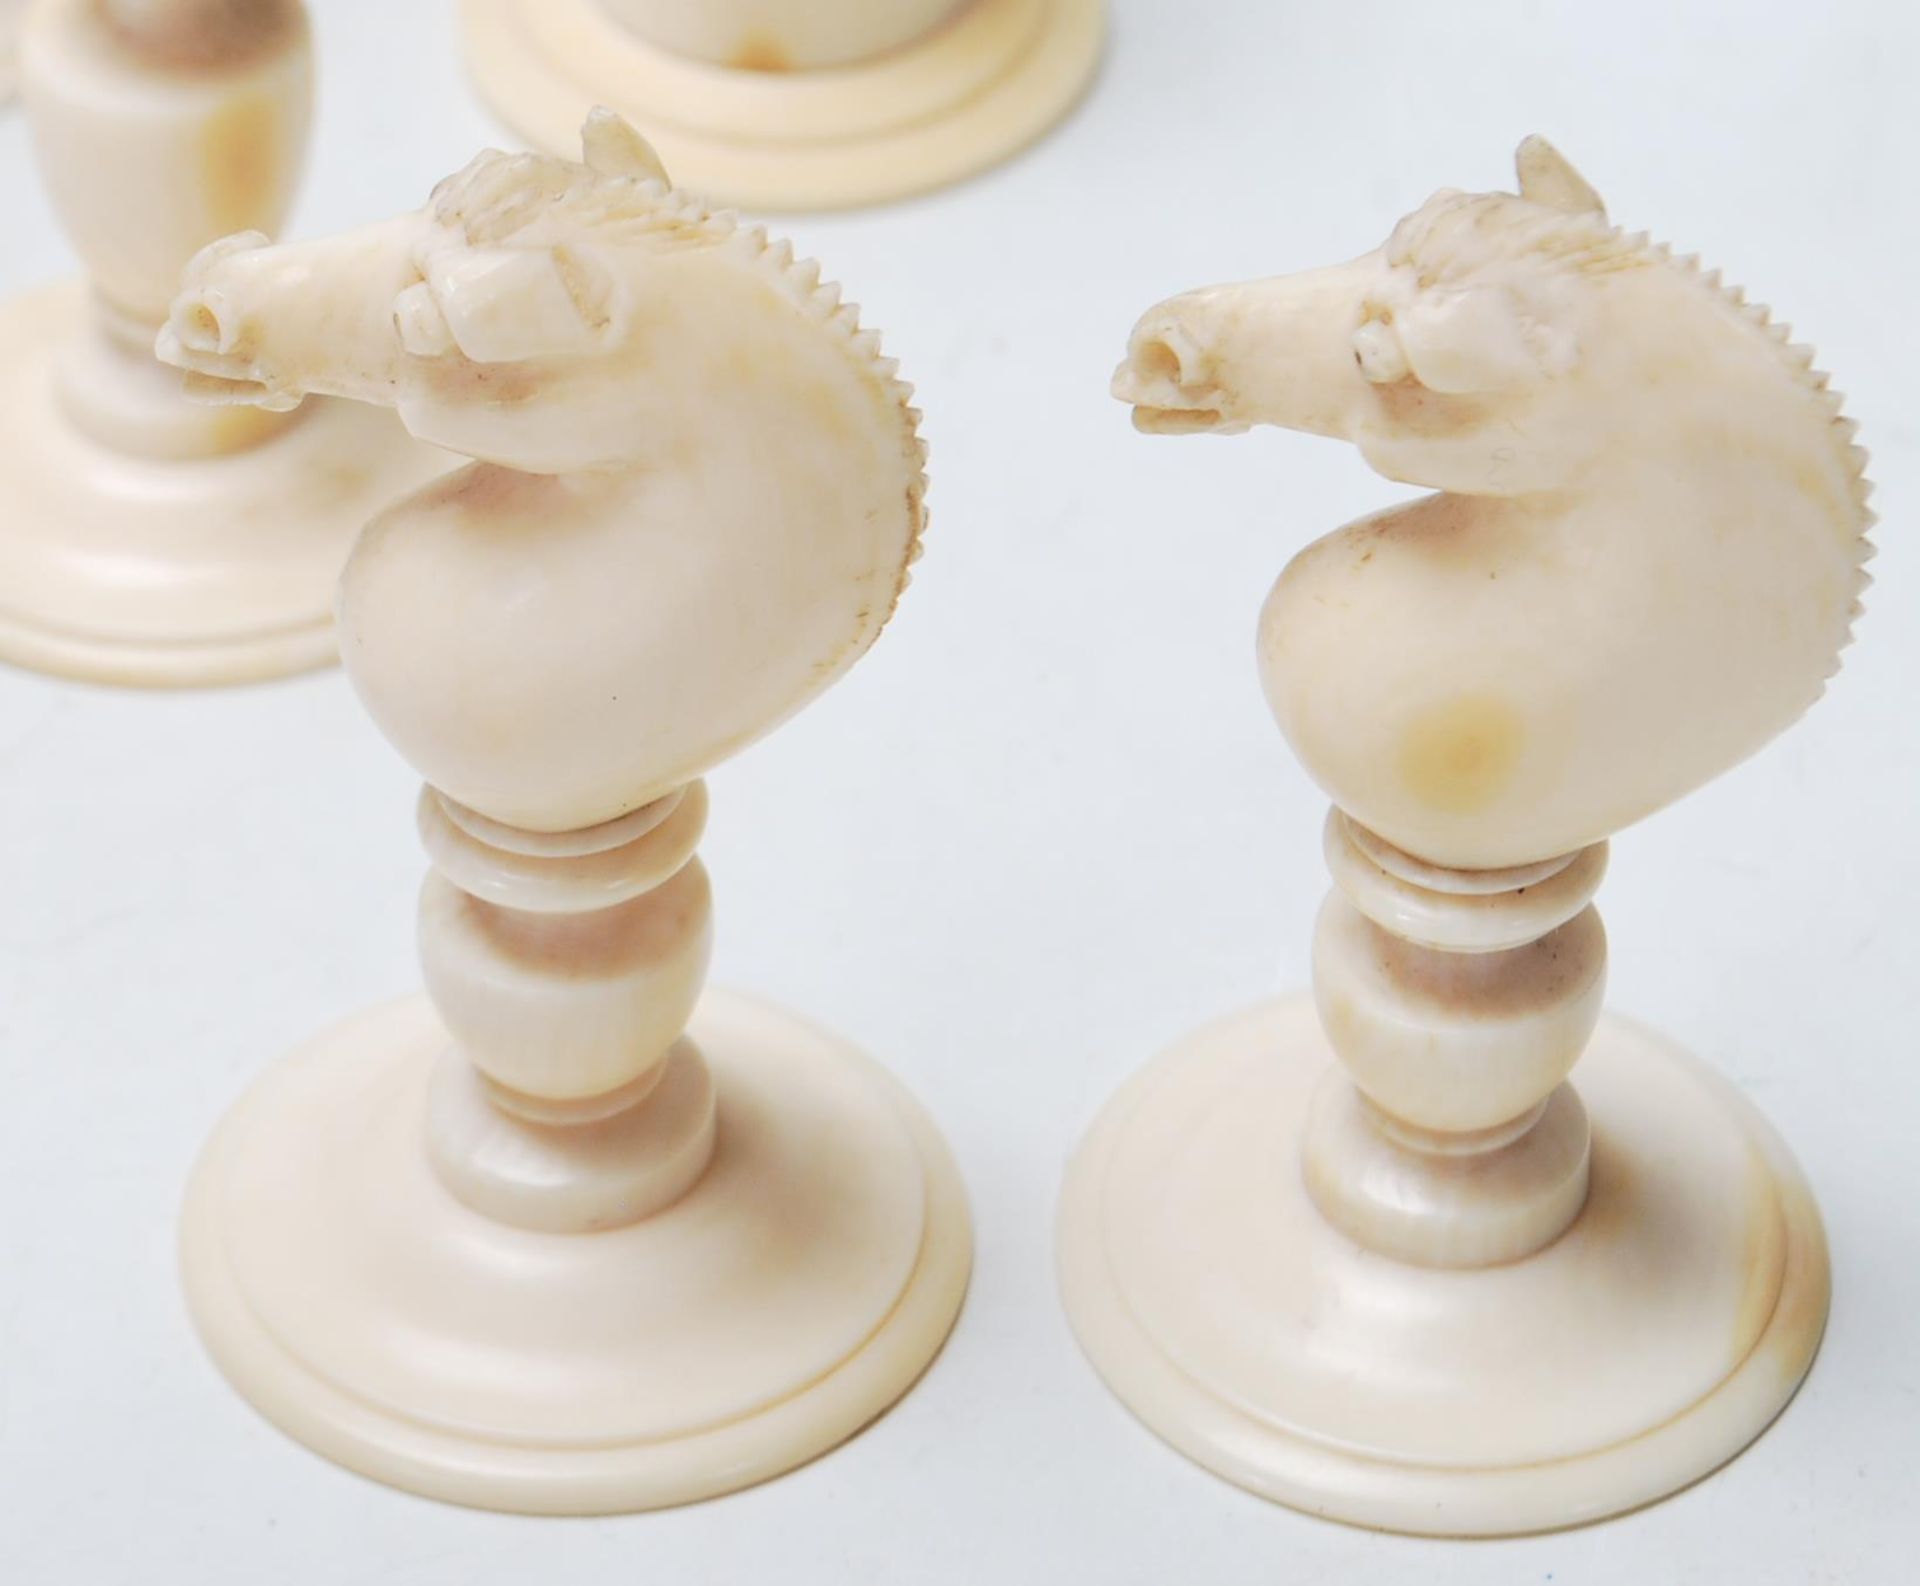 GROUP OF 19TH CENTURY VICTORIAN SATIN IVORY CHESS PIECES - Image 4 of 9